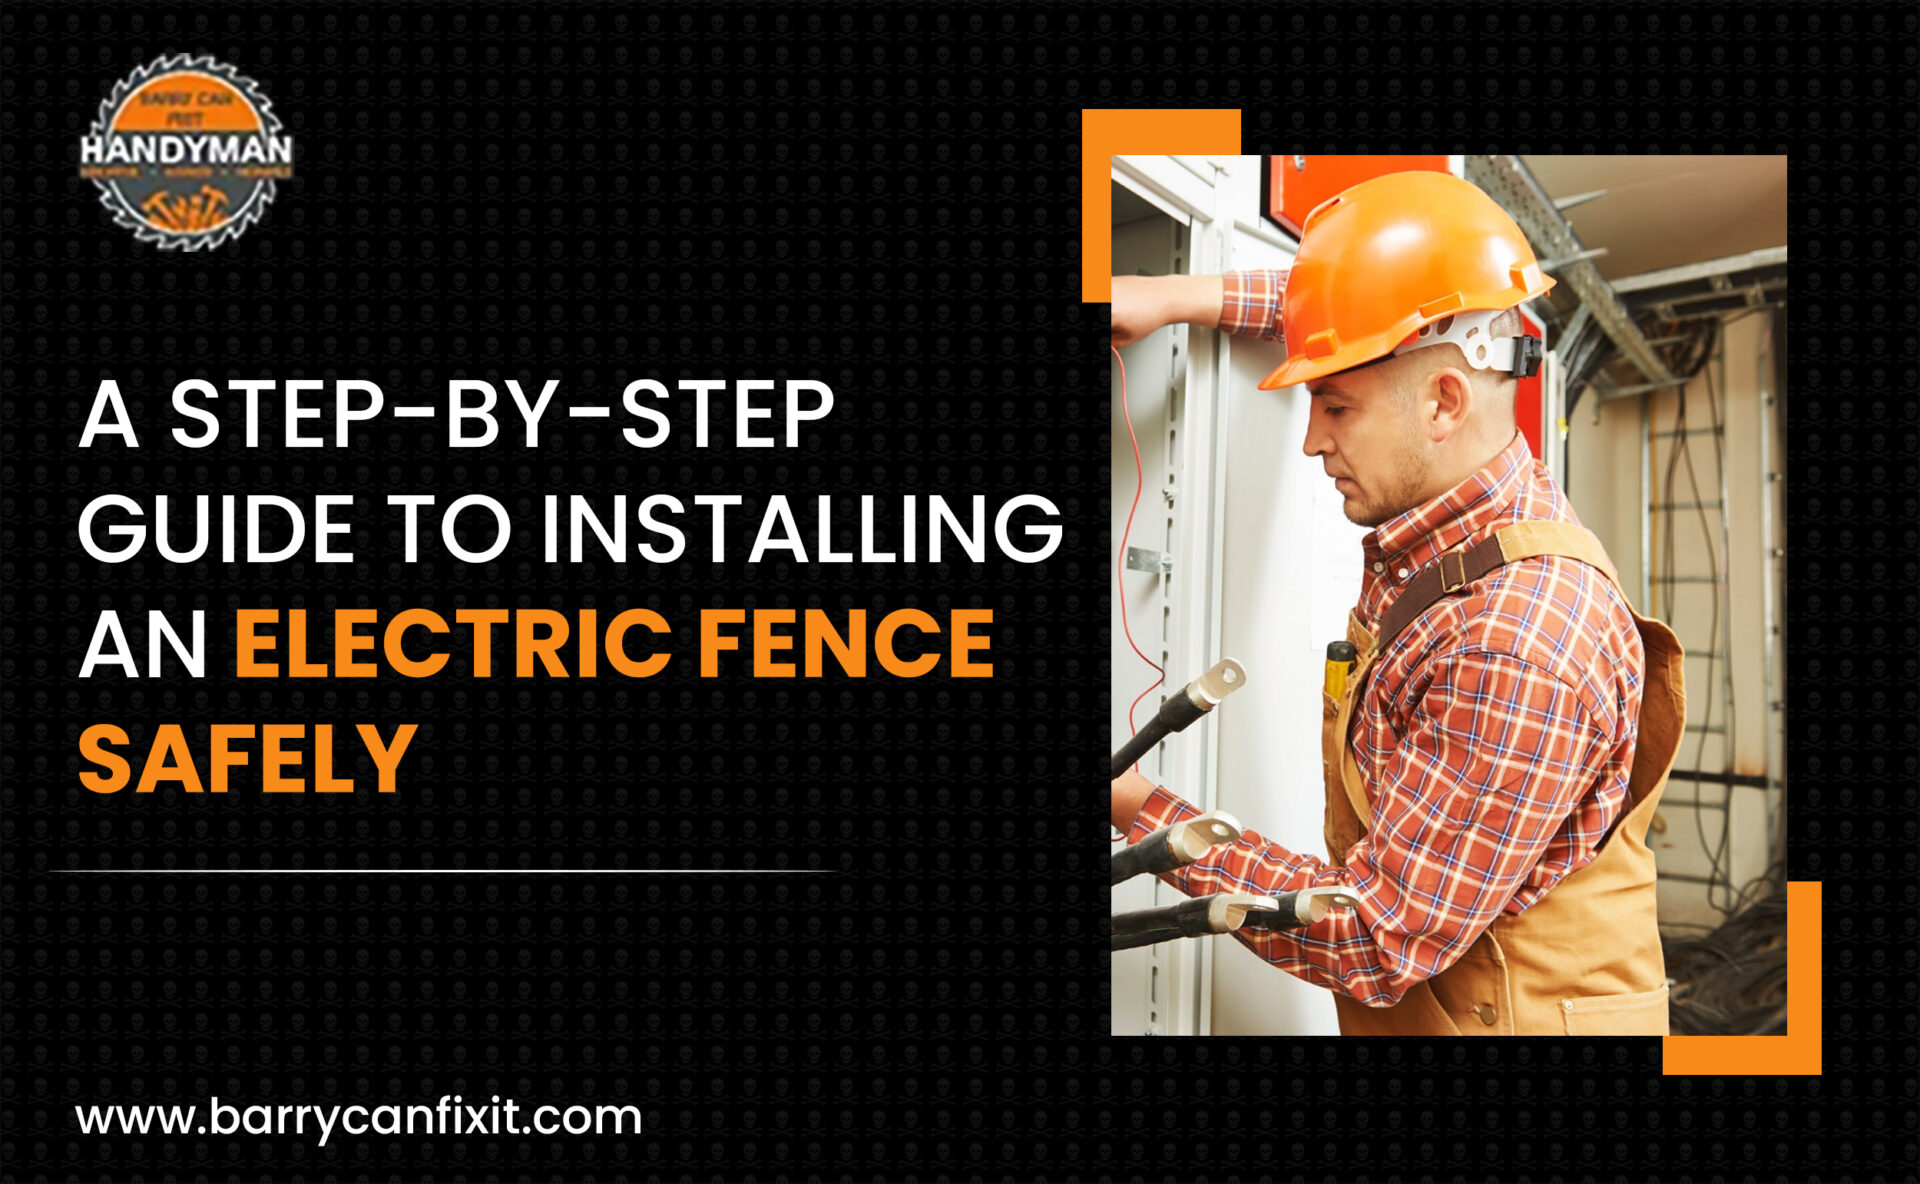 A Step-By-Step Guide To Installing An Electric Fence Safely